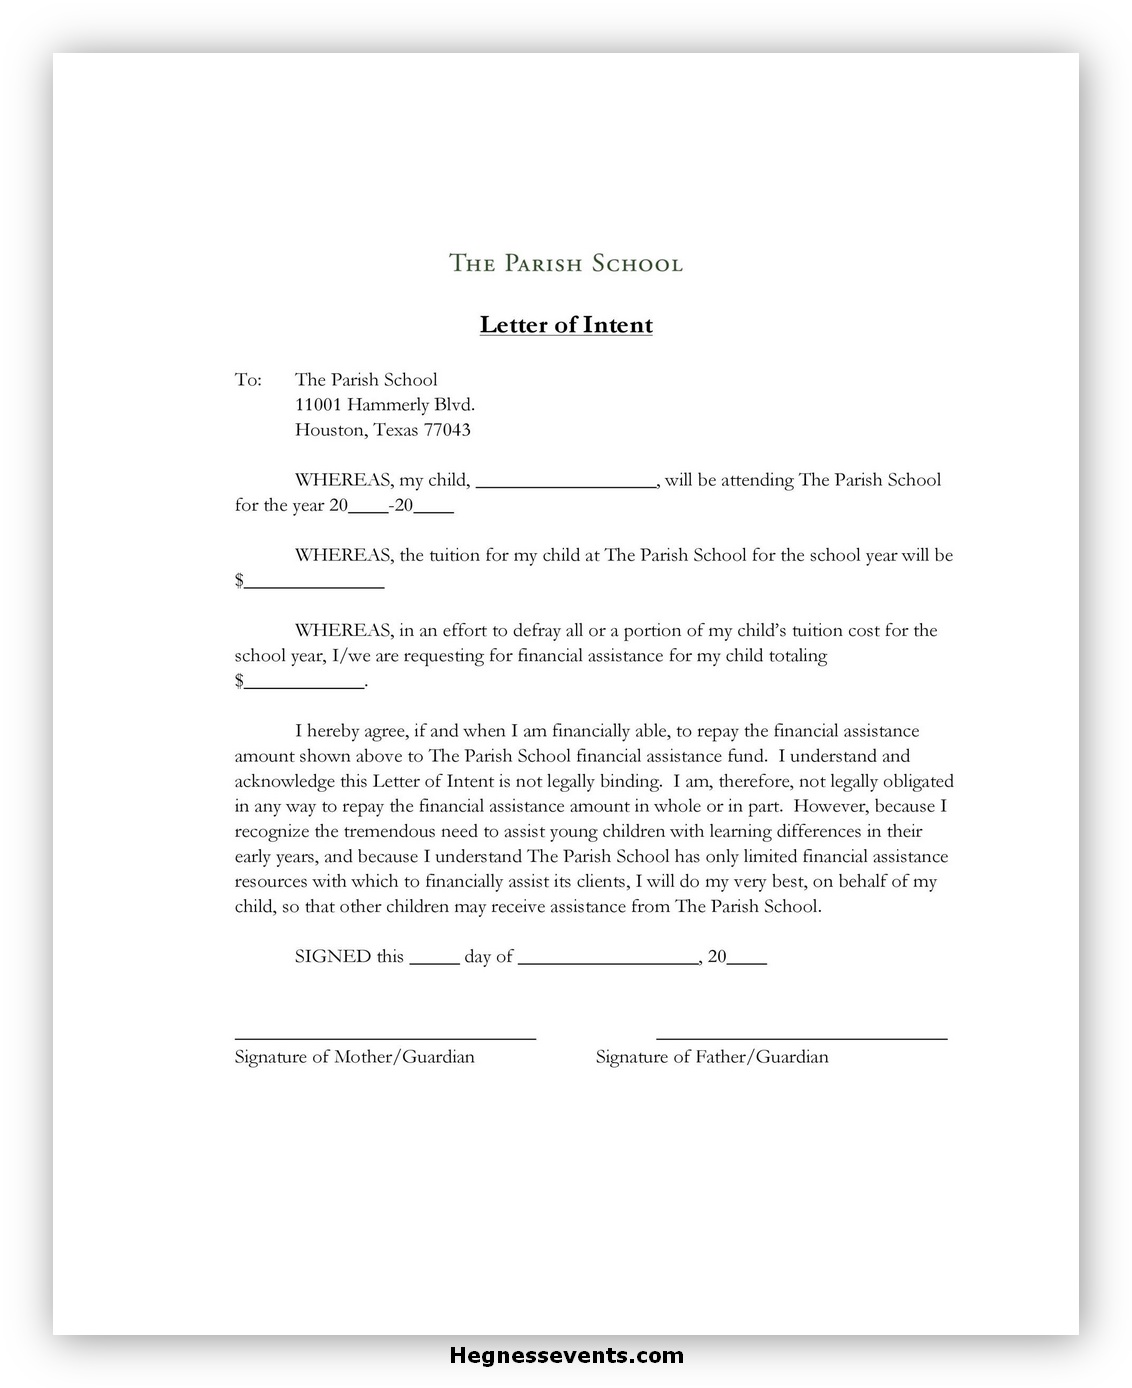 Sample Letter of Intent 07